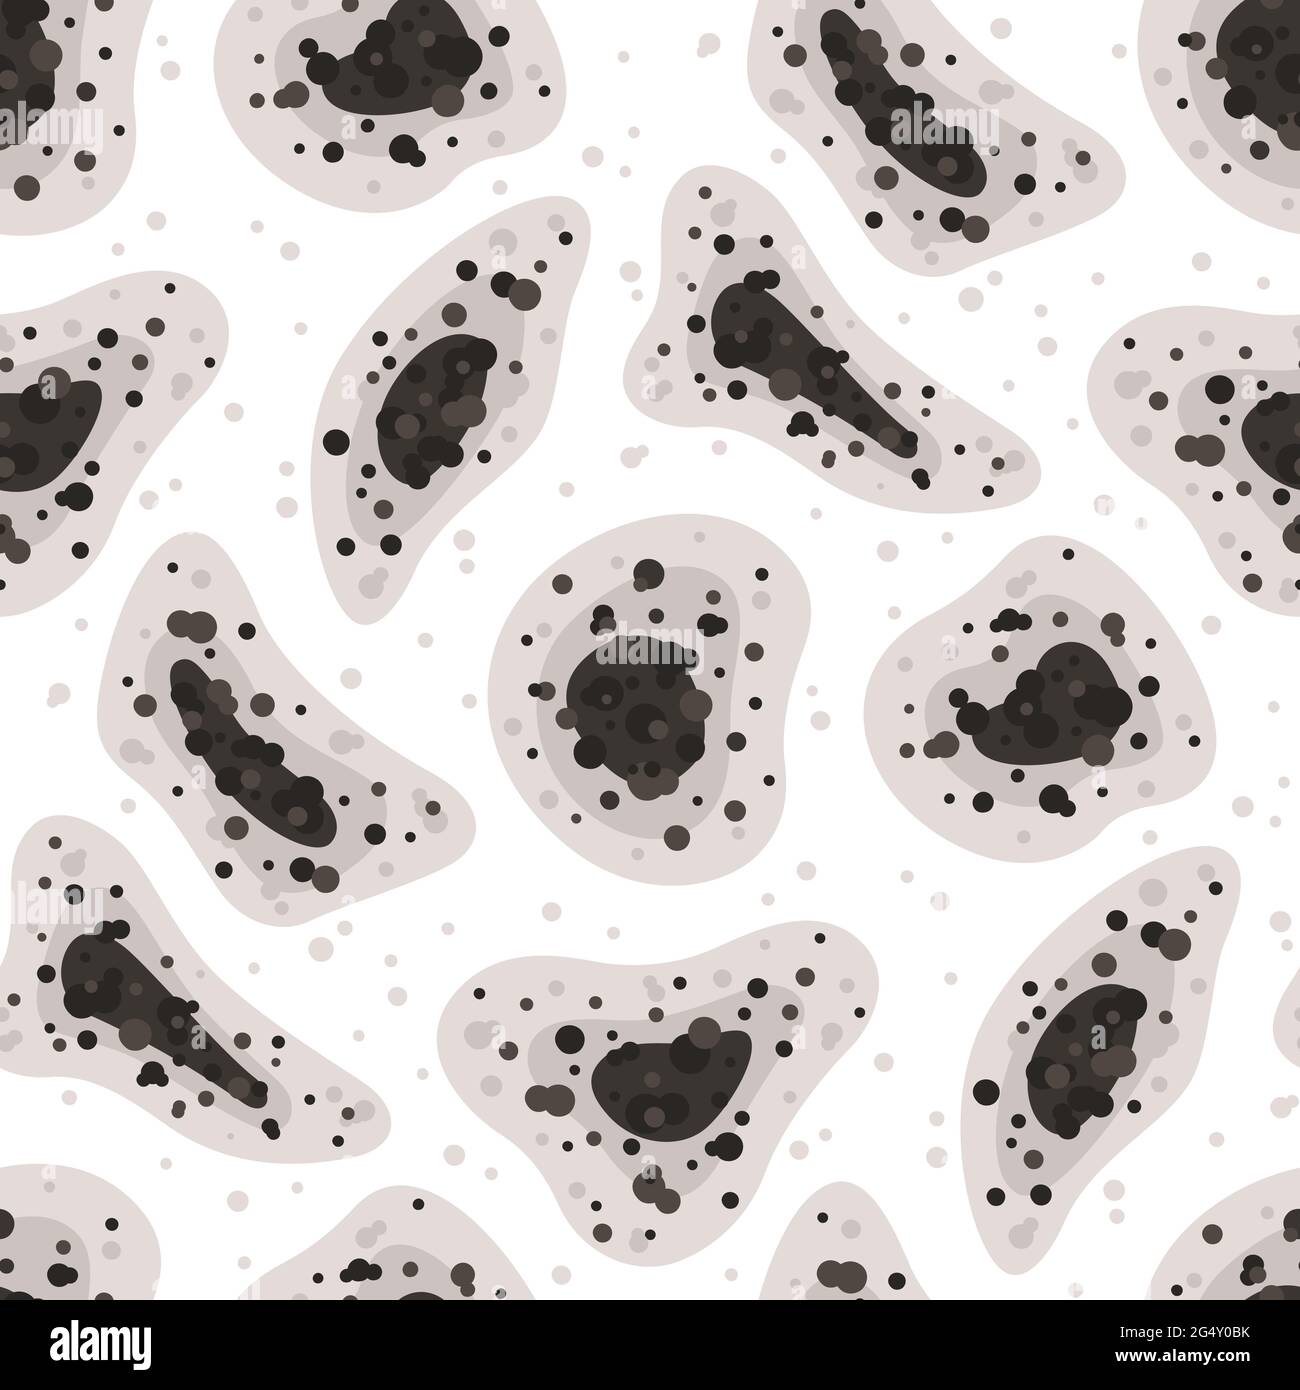 Seamless pattern with black mold spots. Toxic mold spores. Fungi and bacteria. Black fungus outbreak. Mucormycosis disease. Isolated vector Stock Vector